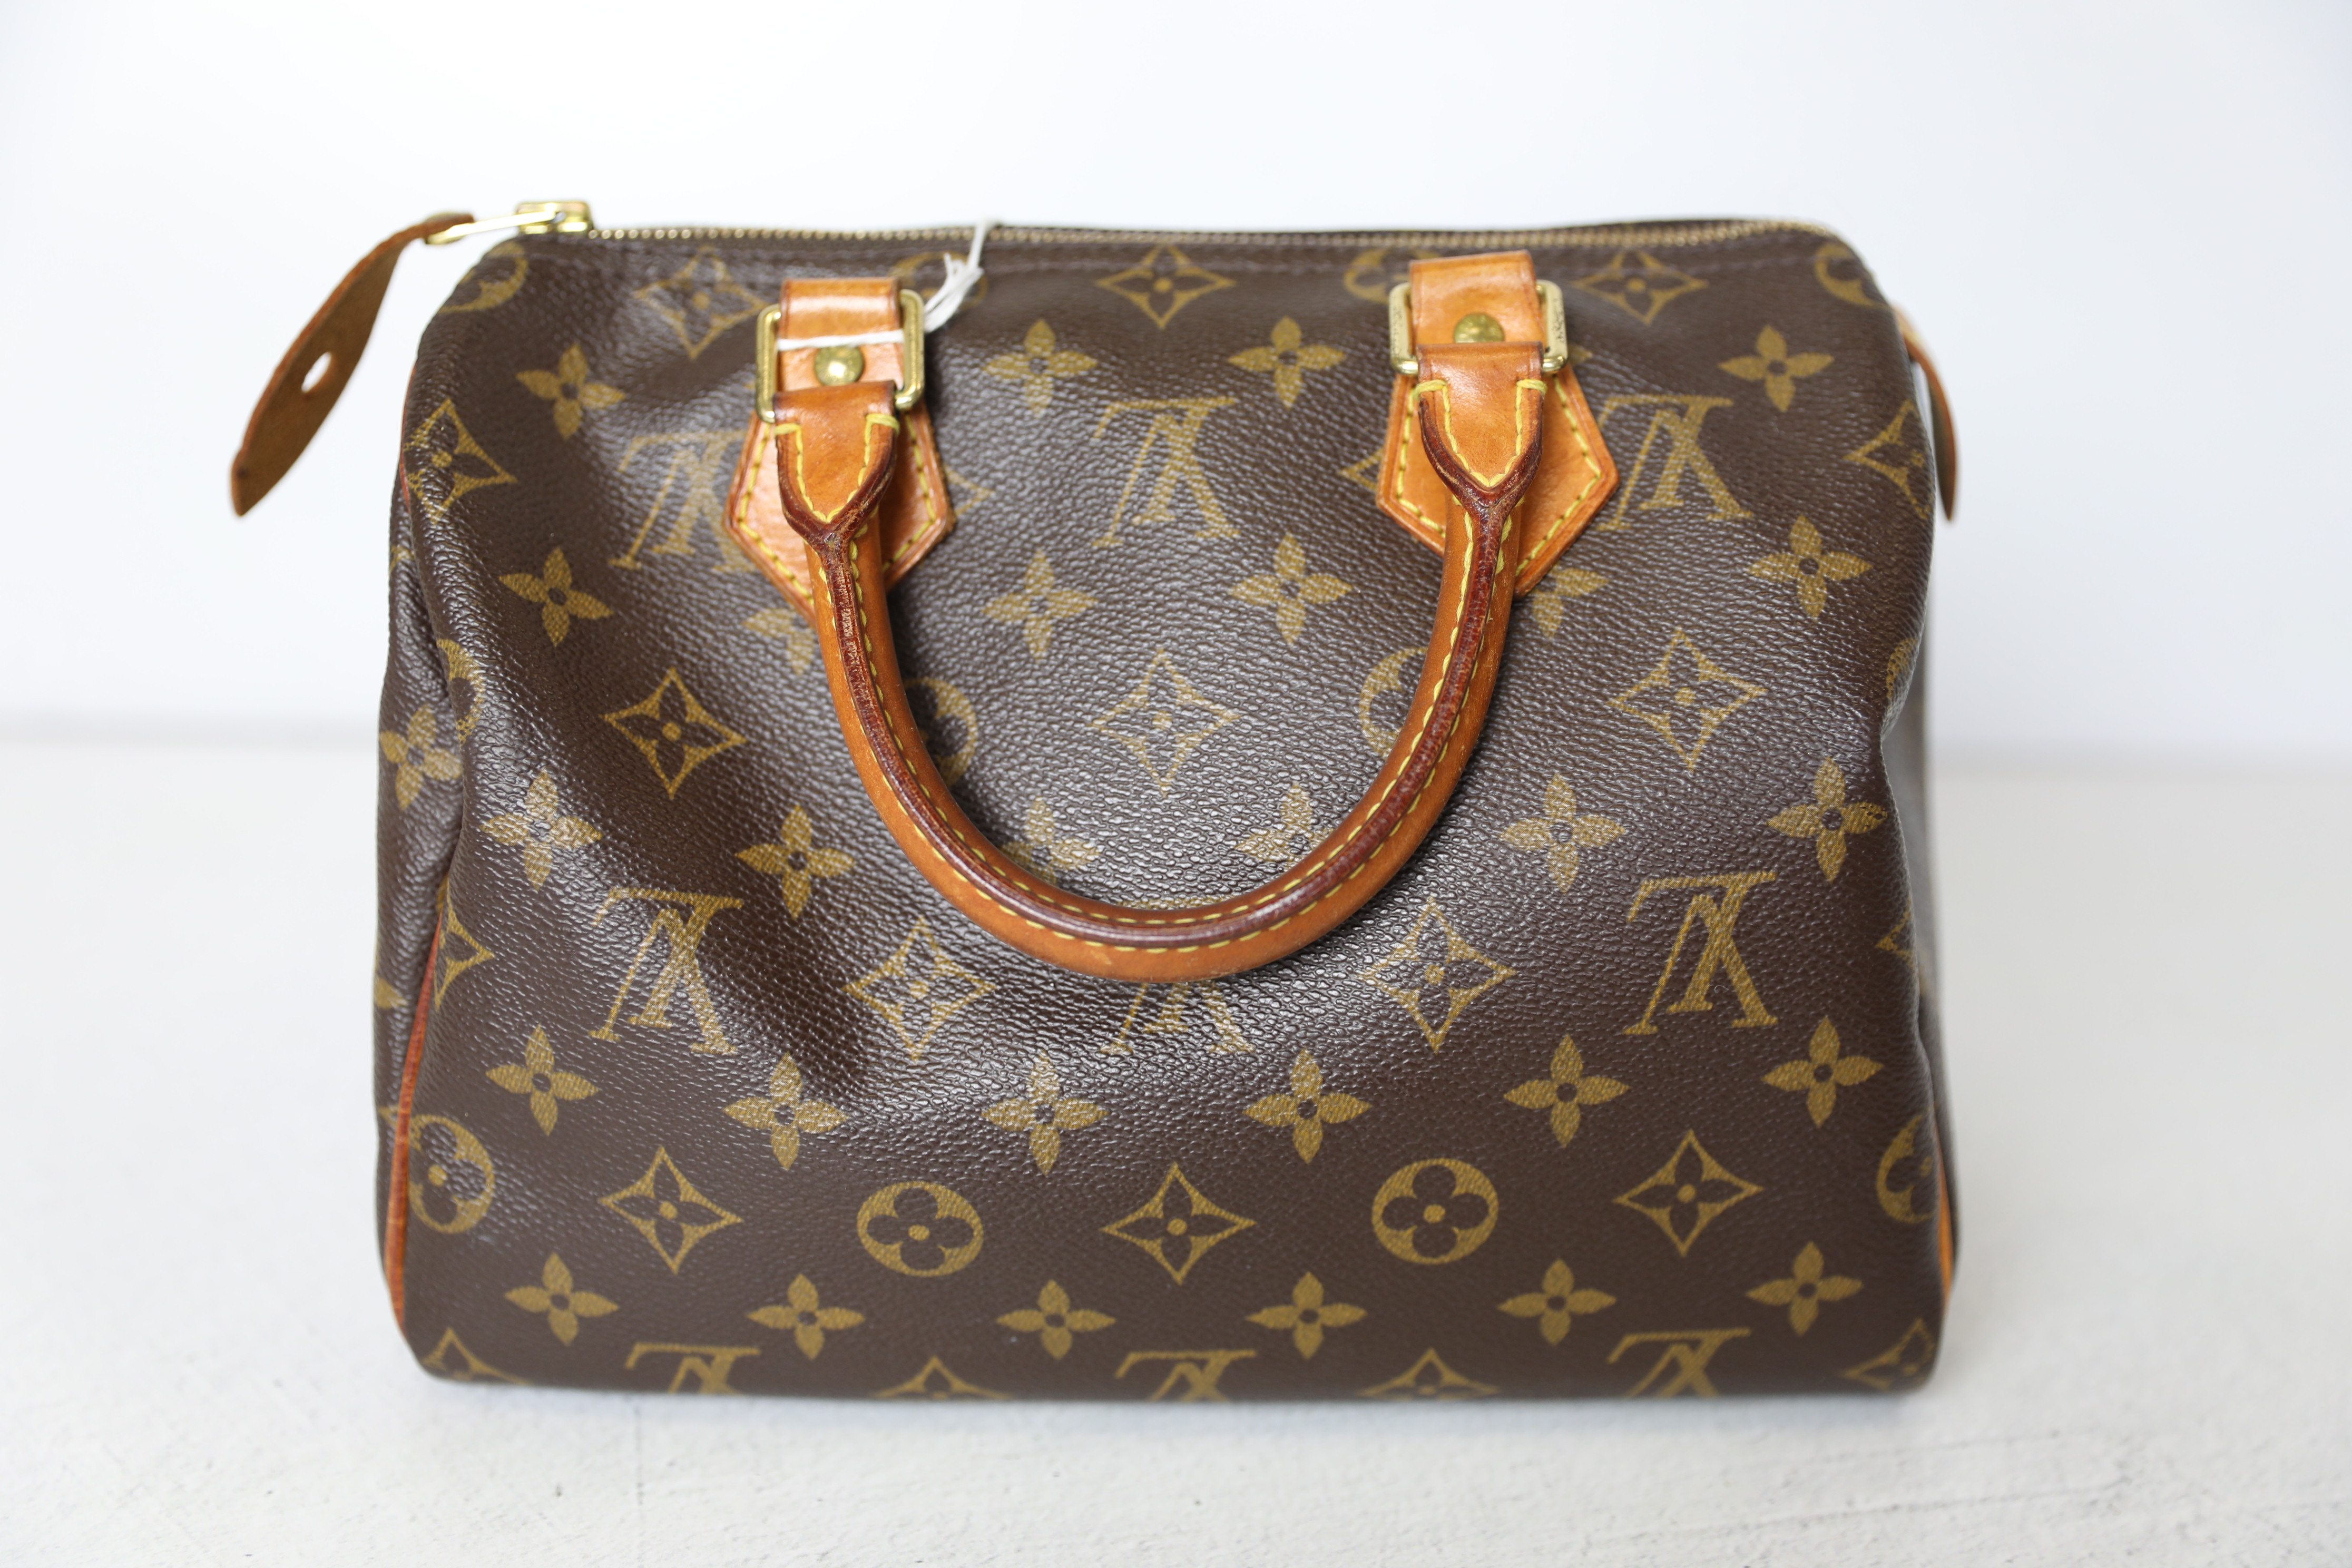 Louis Vuitton By the Pool Speedy 25, New in Dustbag - Julia Rose Boston